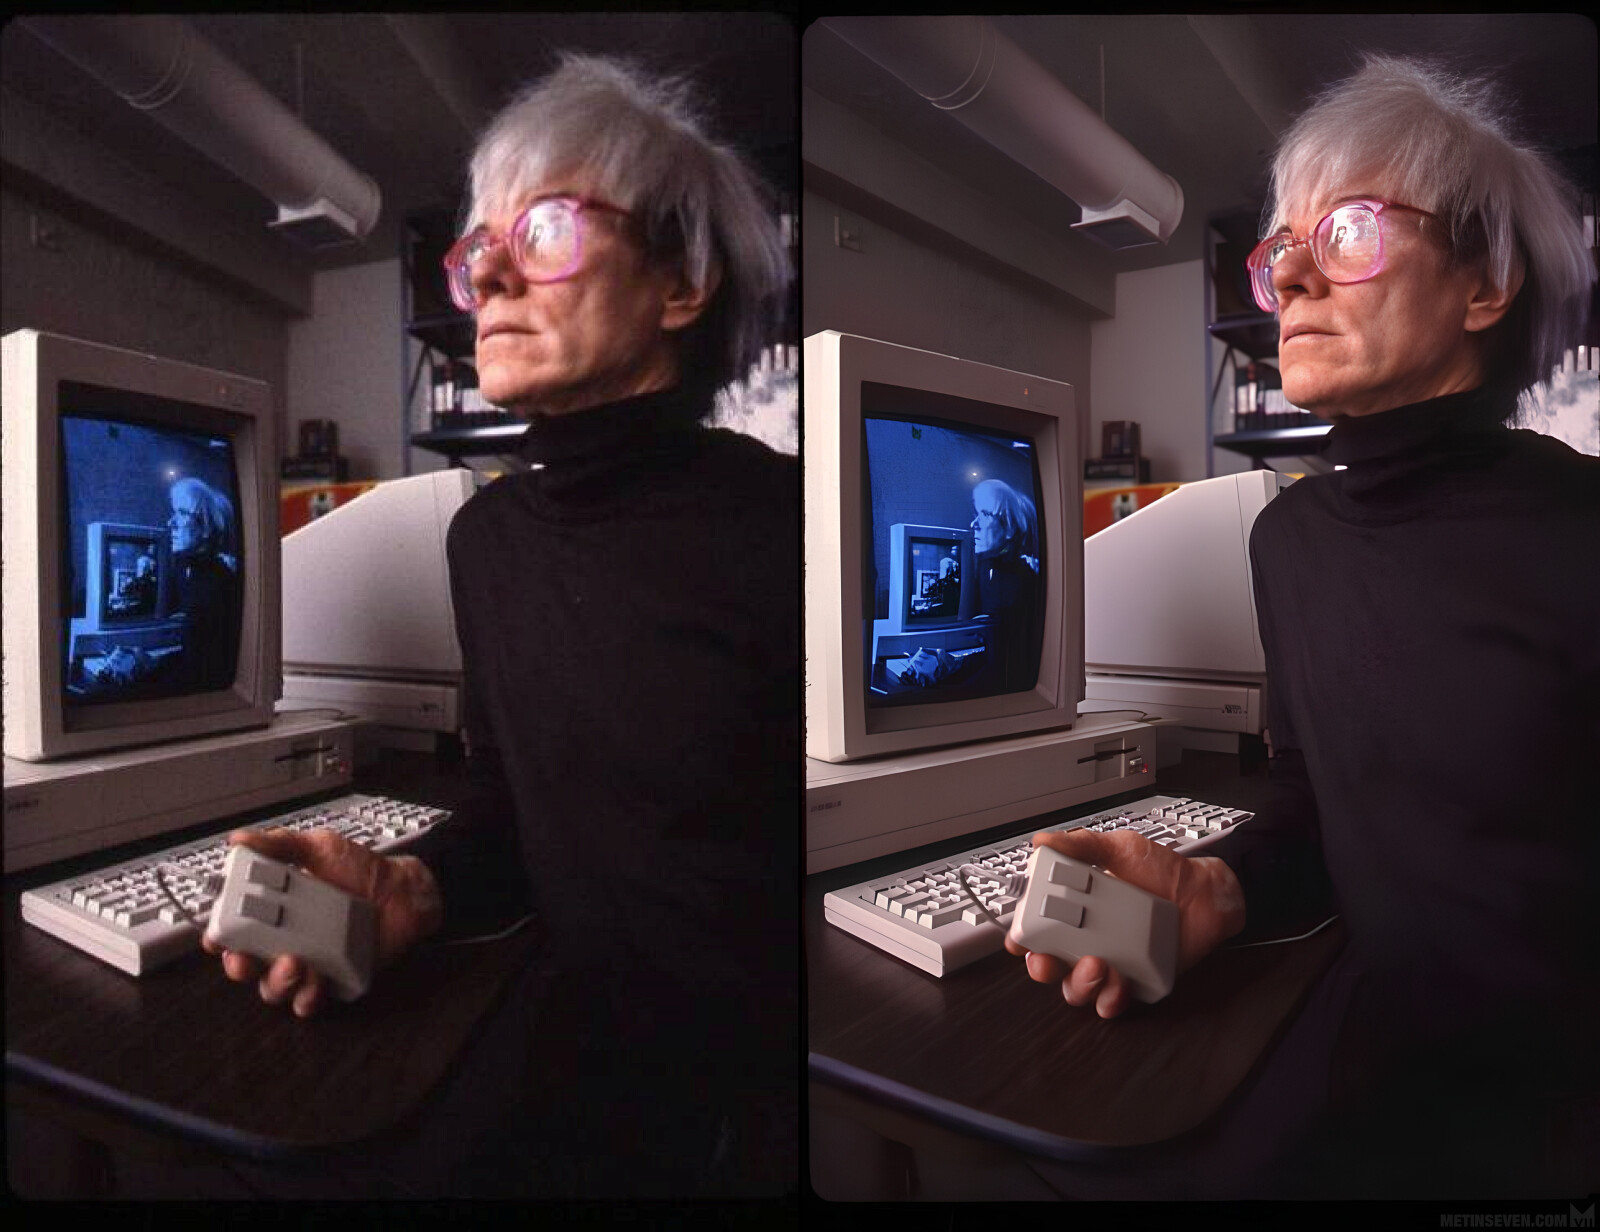 Andy Warhol holding a mouse next to an Amiga 1000 with a tilted monitor, around its public introduction in July 1985. Such a magical time of the digital revolution. ❤️